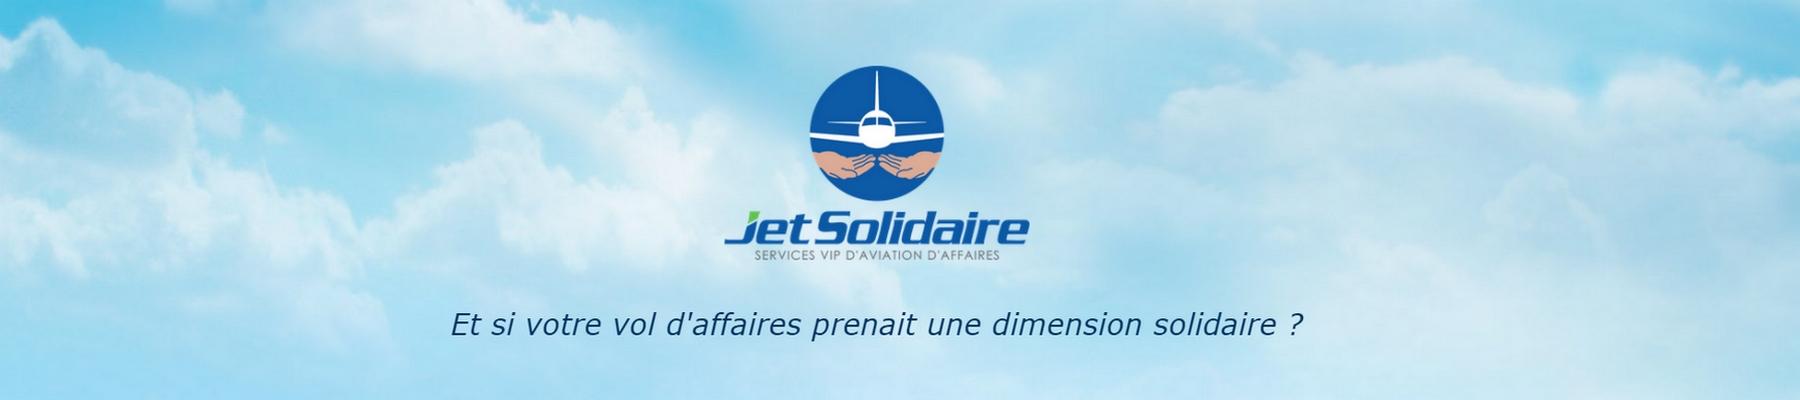 Jet Solidaire